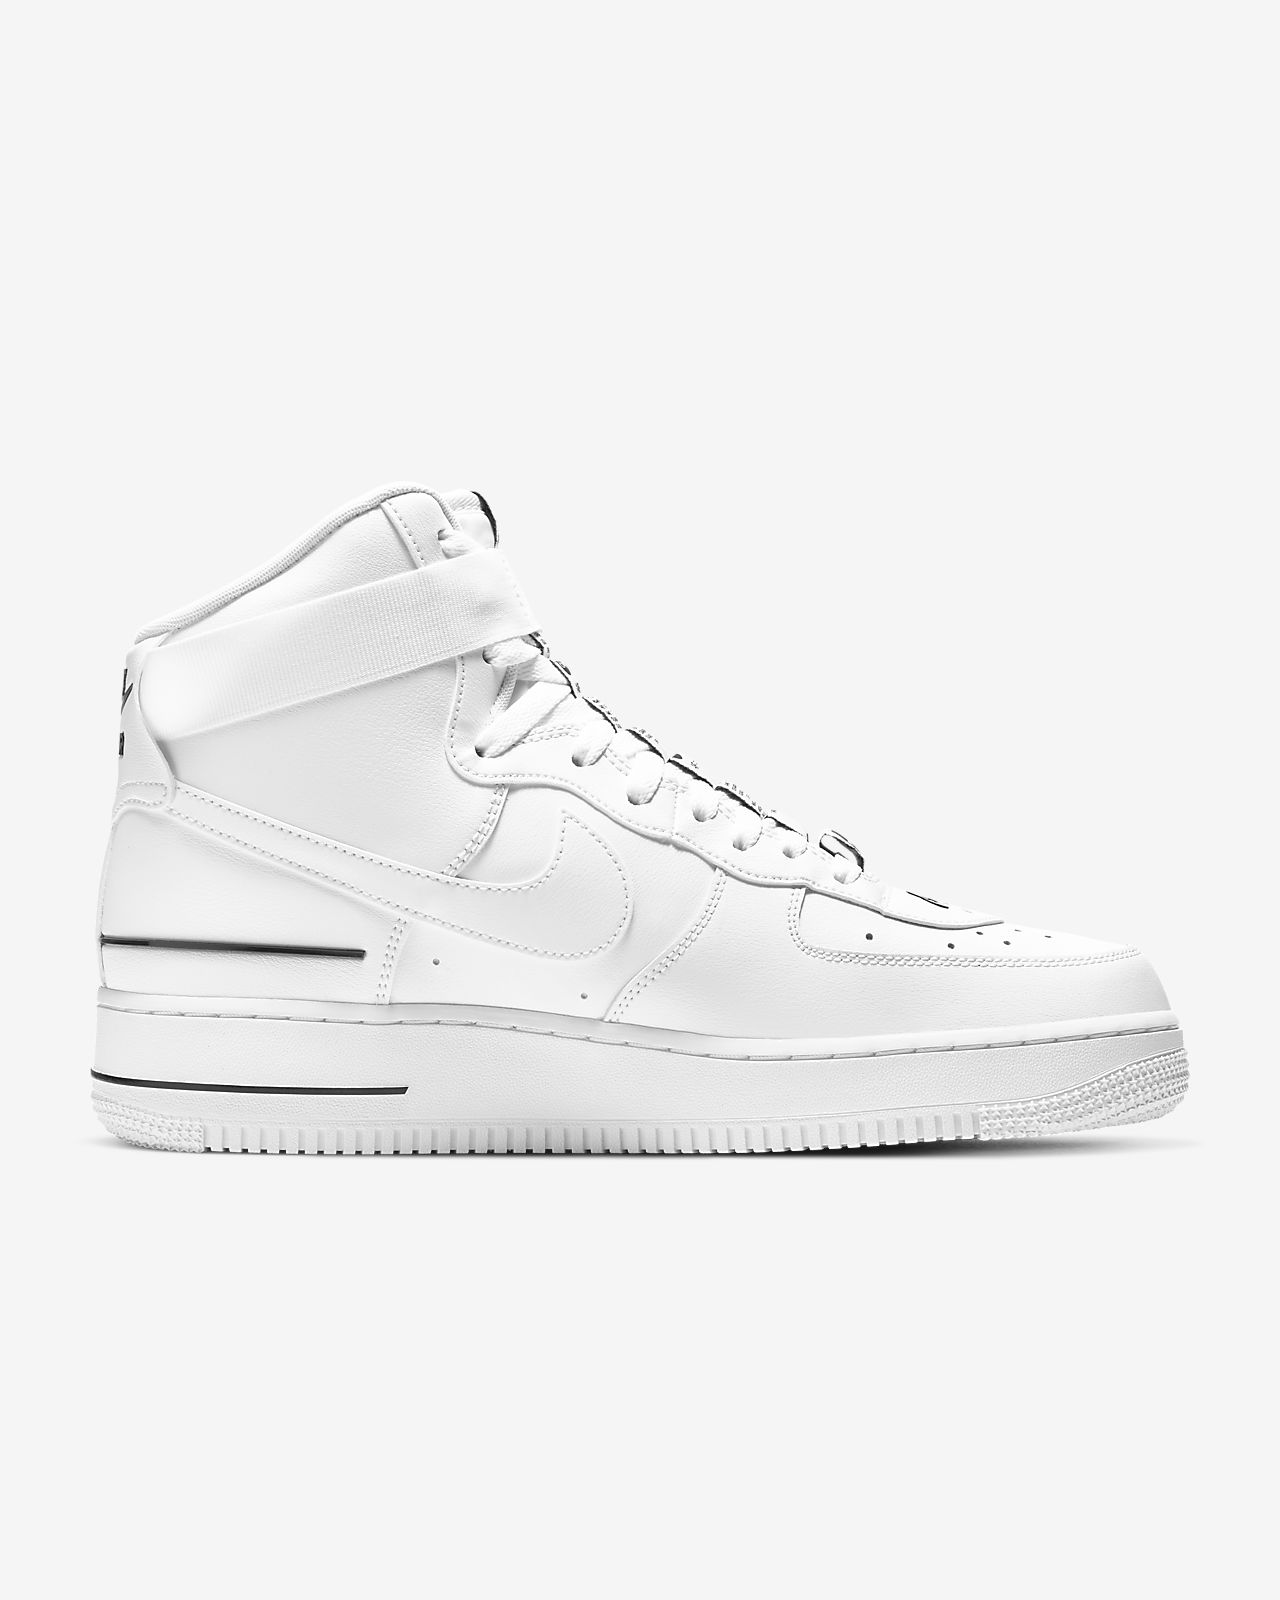 nike air force 1 lv8 size 7.5